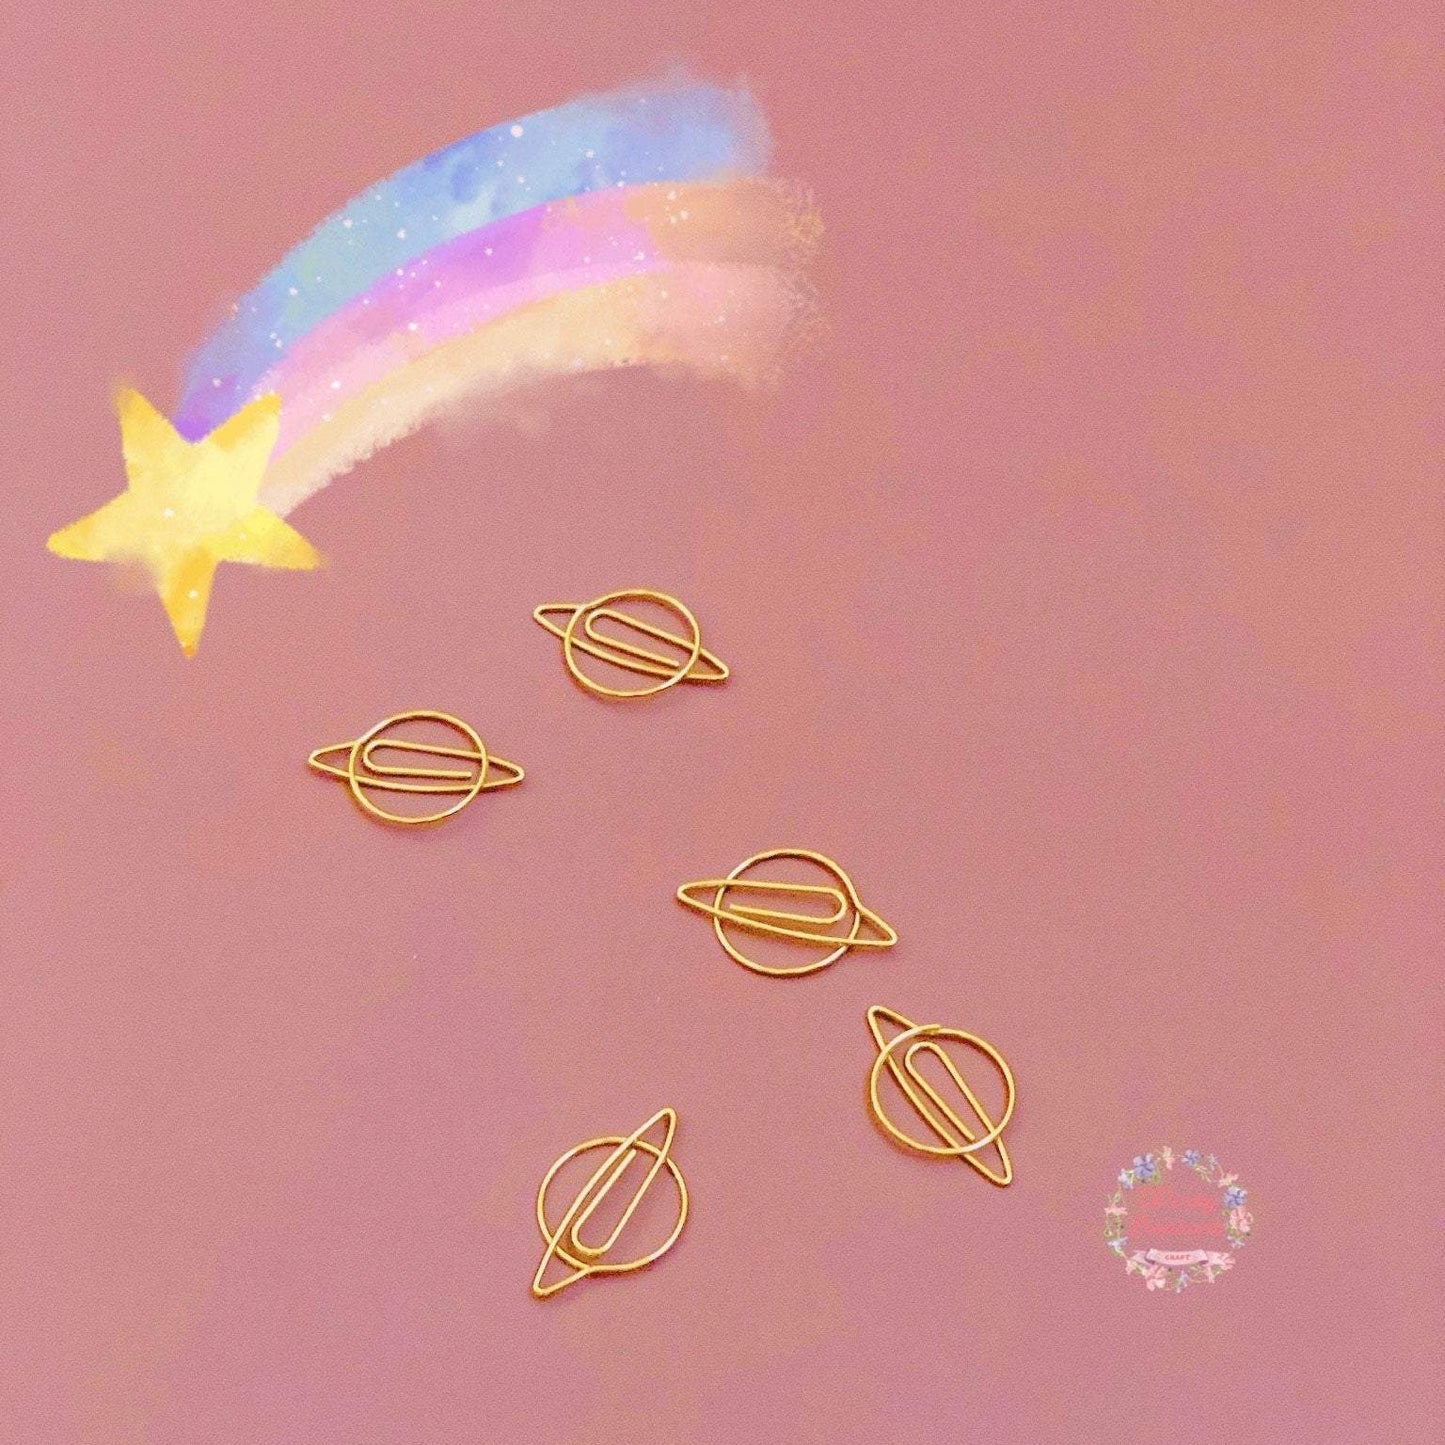 Five gold planet-shaped paper clips are in a pink background, A colorful meteor is drawn on the upper left